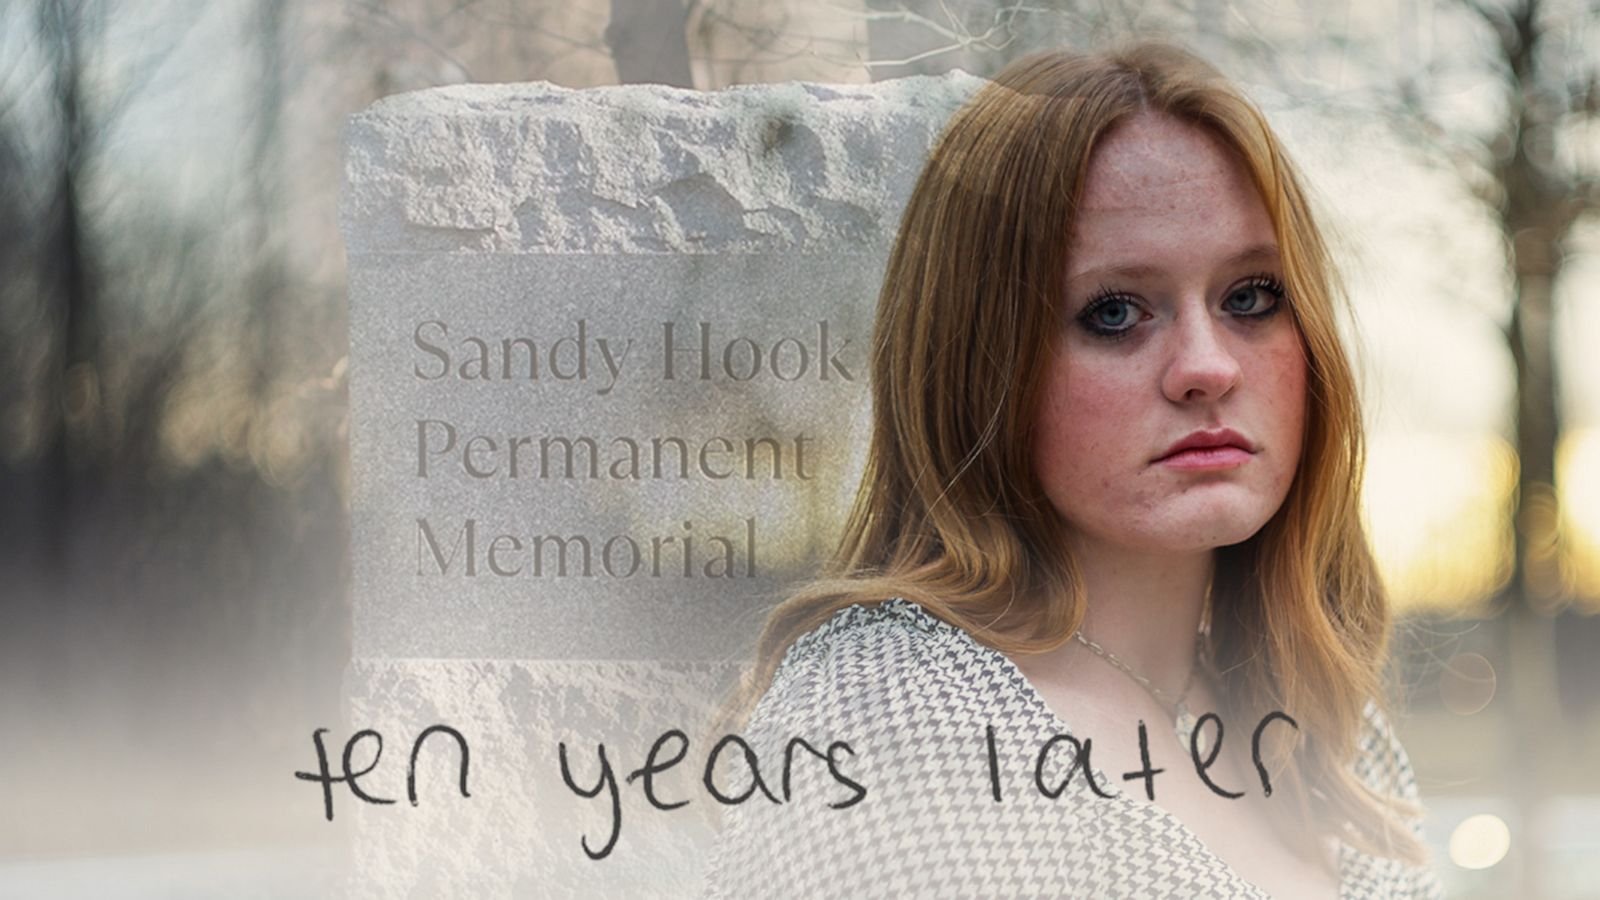 10 years since Sandy Hook, this 17-year-old opens up on being a survivor